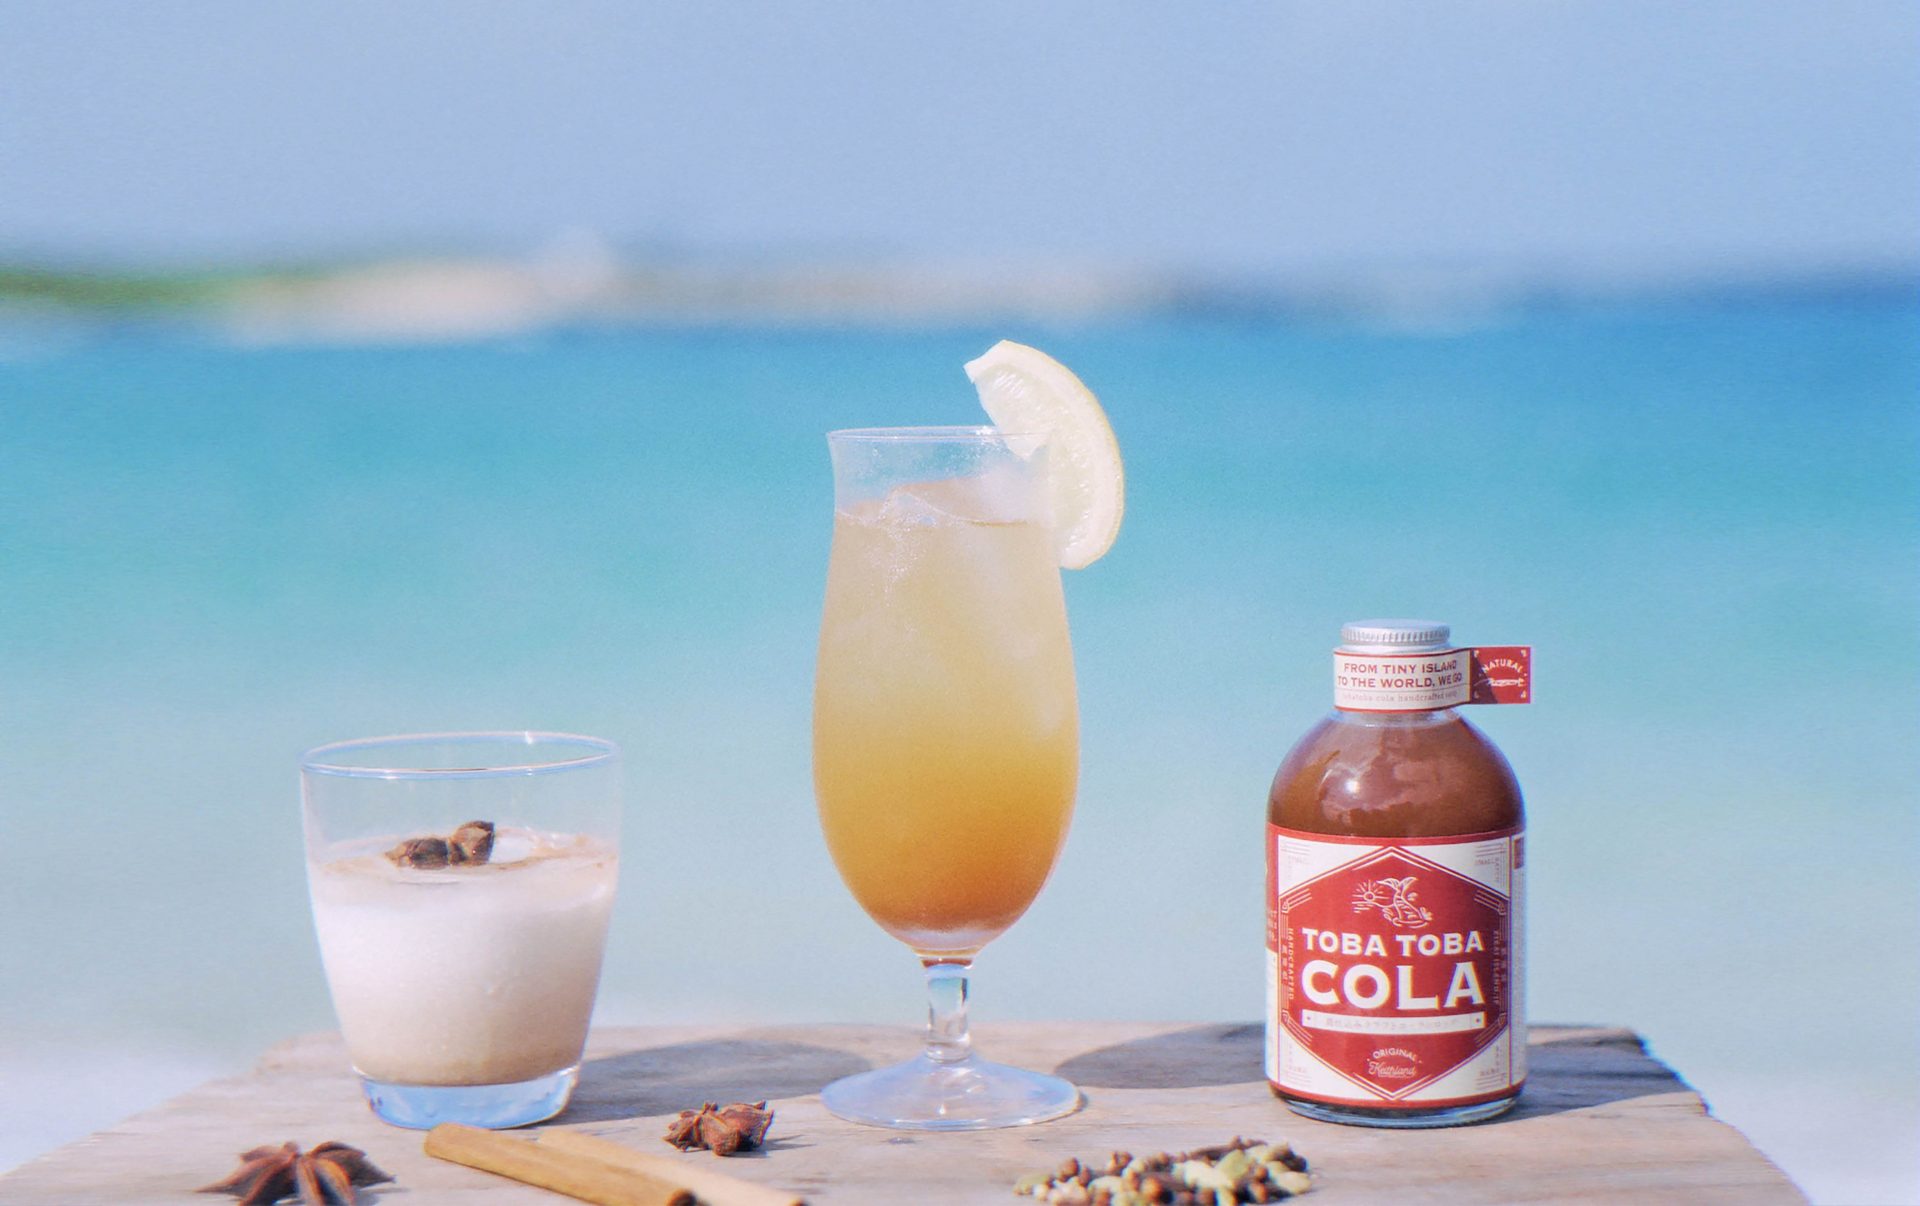 A Remote Island’s Very Own Homegrown Craft Cola